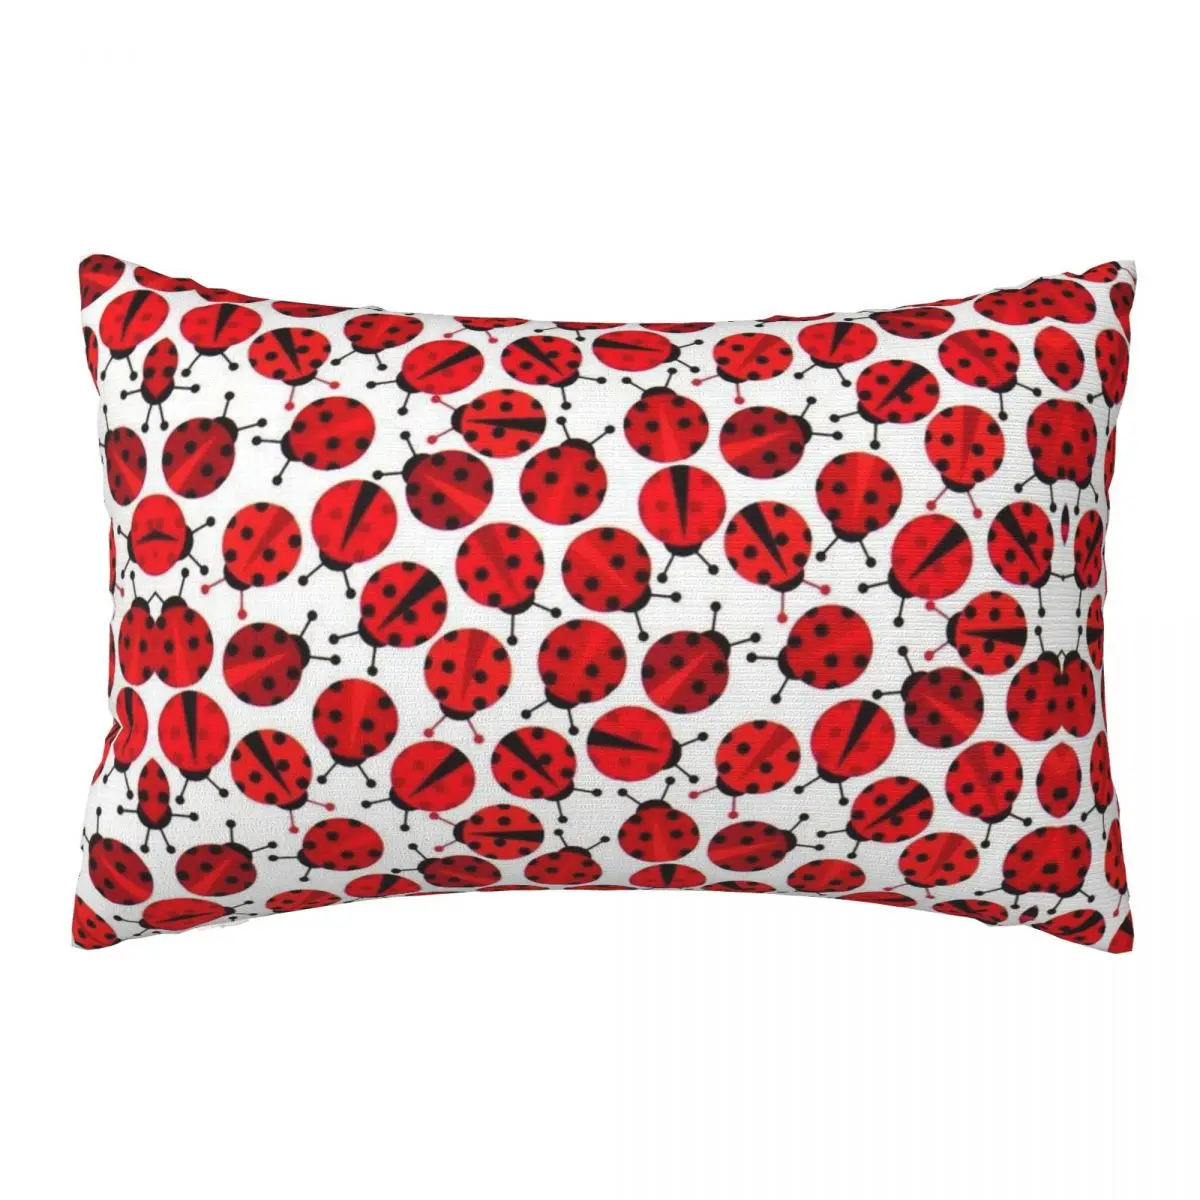 

Red Ladybugs Decorative Pillow Covers Throw Pillow Cover Home Pillows Shells Cushion Cover Zippered Pillowcase